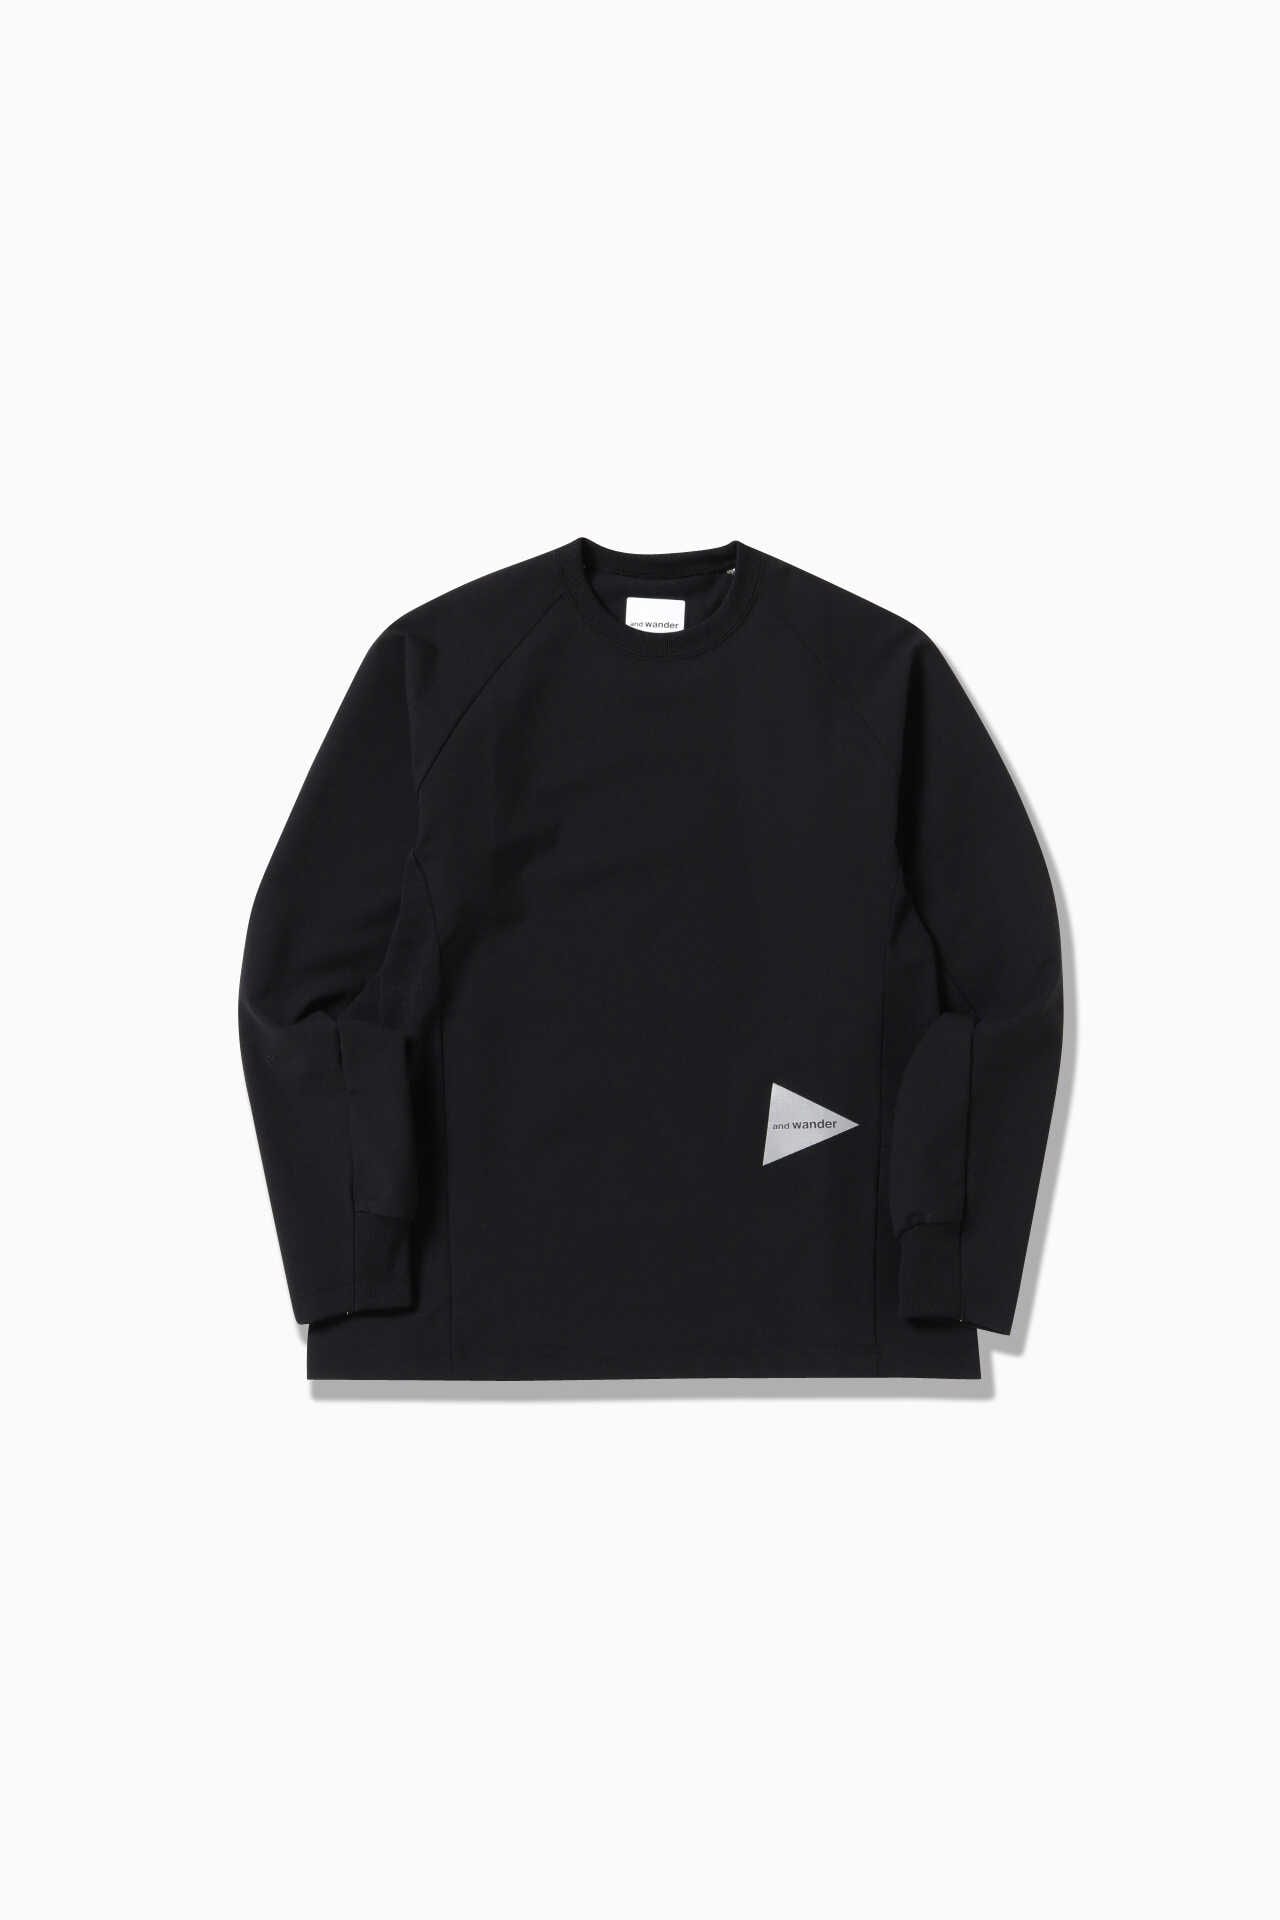 hybrid base layer LS T | cut_knit | and wander ONLINE STORE